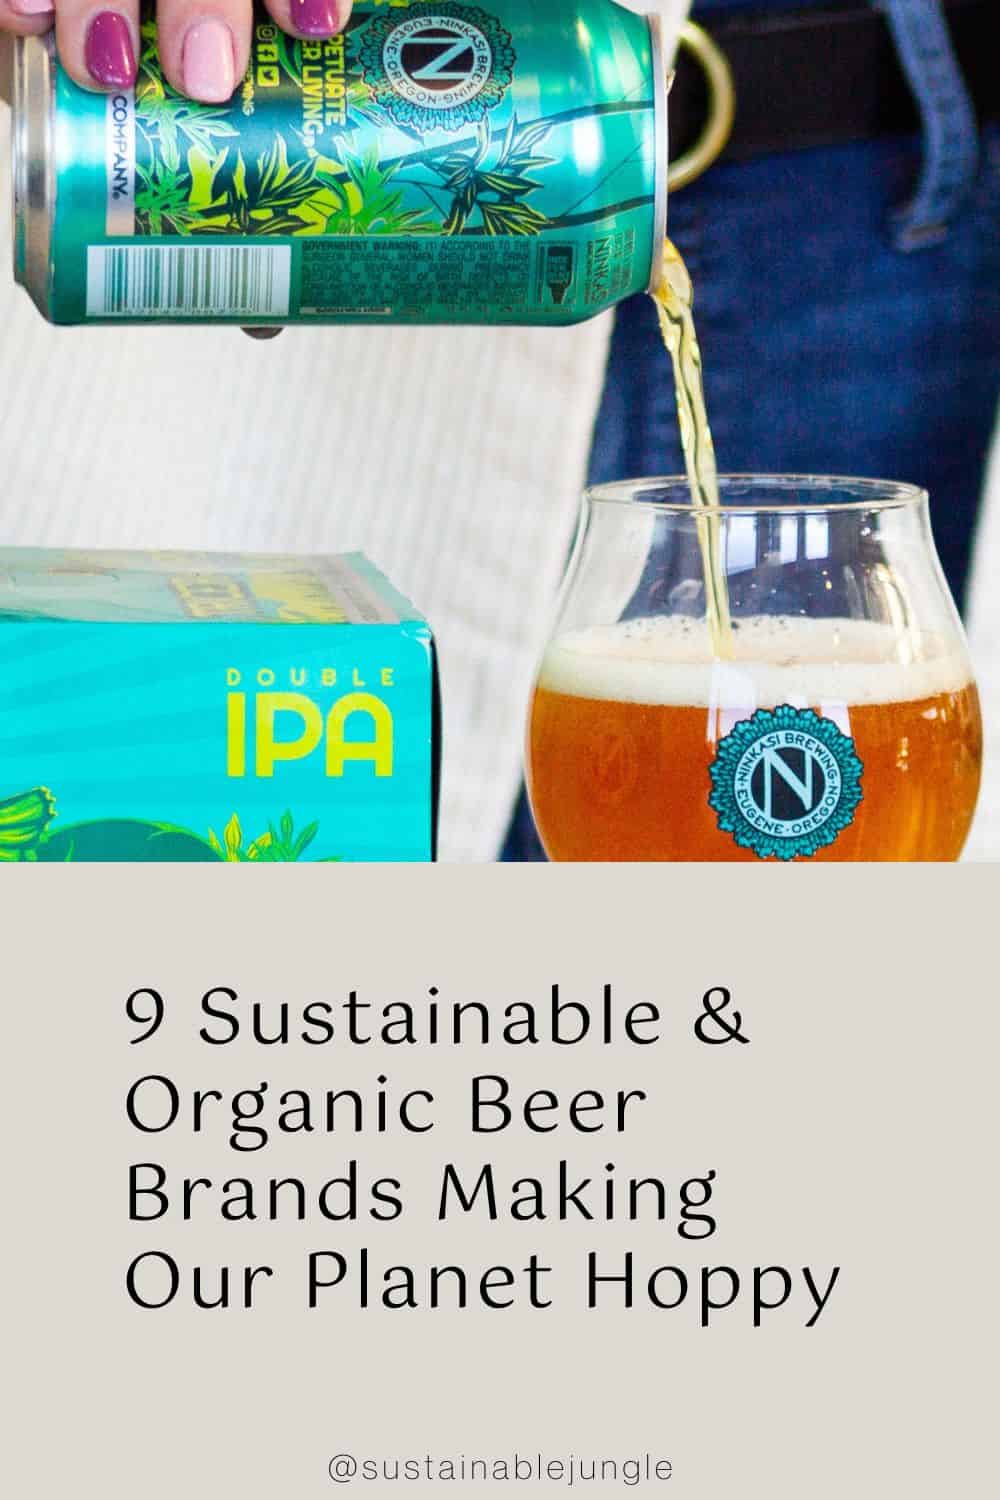 9 Sustainable & Organic Beer Brands Making Our Planet Hoppy Image by Ninkasi Brewery #organicbeer #sustainablebeer #organicbeerbrands #bestorganicbeer #sustainablebeercompanies #sustainablebeenpractices #sustainablejungle